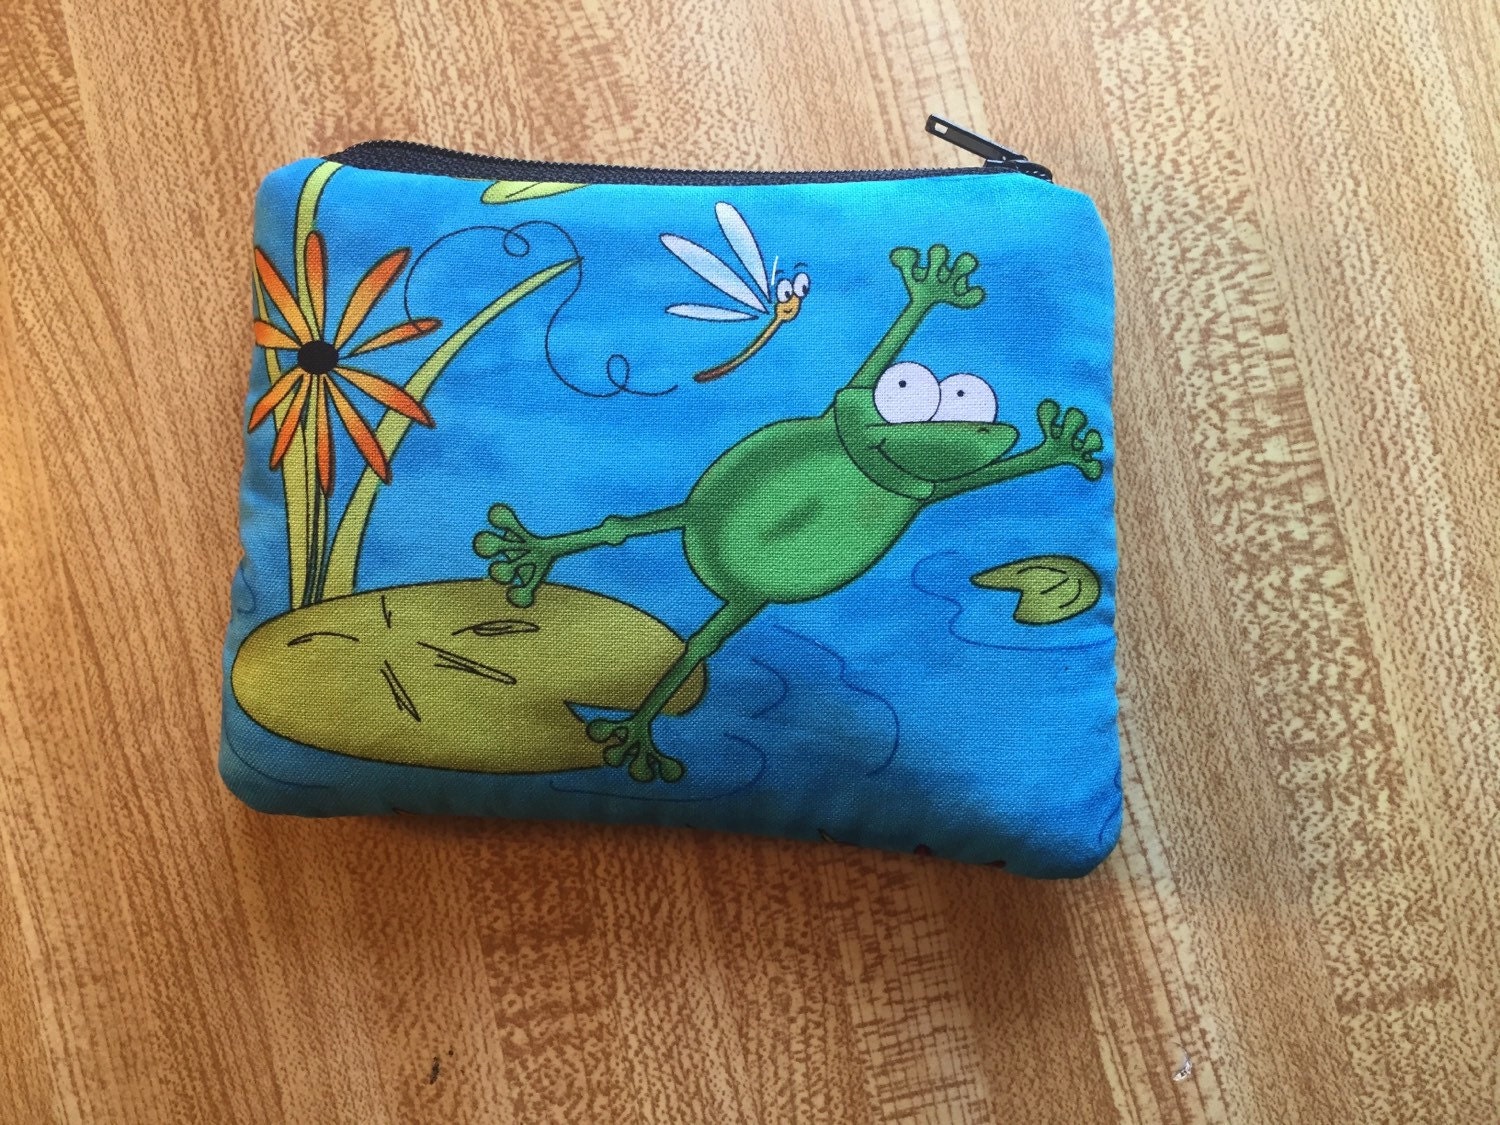 Frog and the dragonfly coin purse by badasboutique101 on Etsy